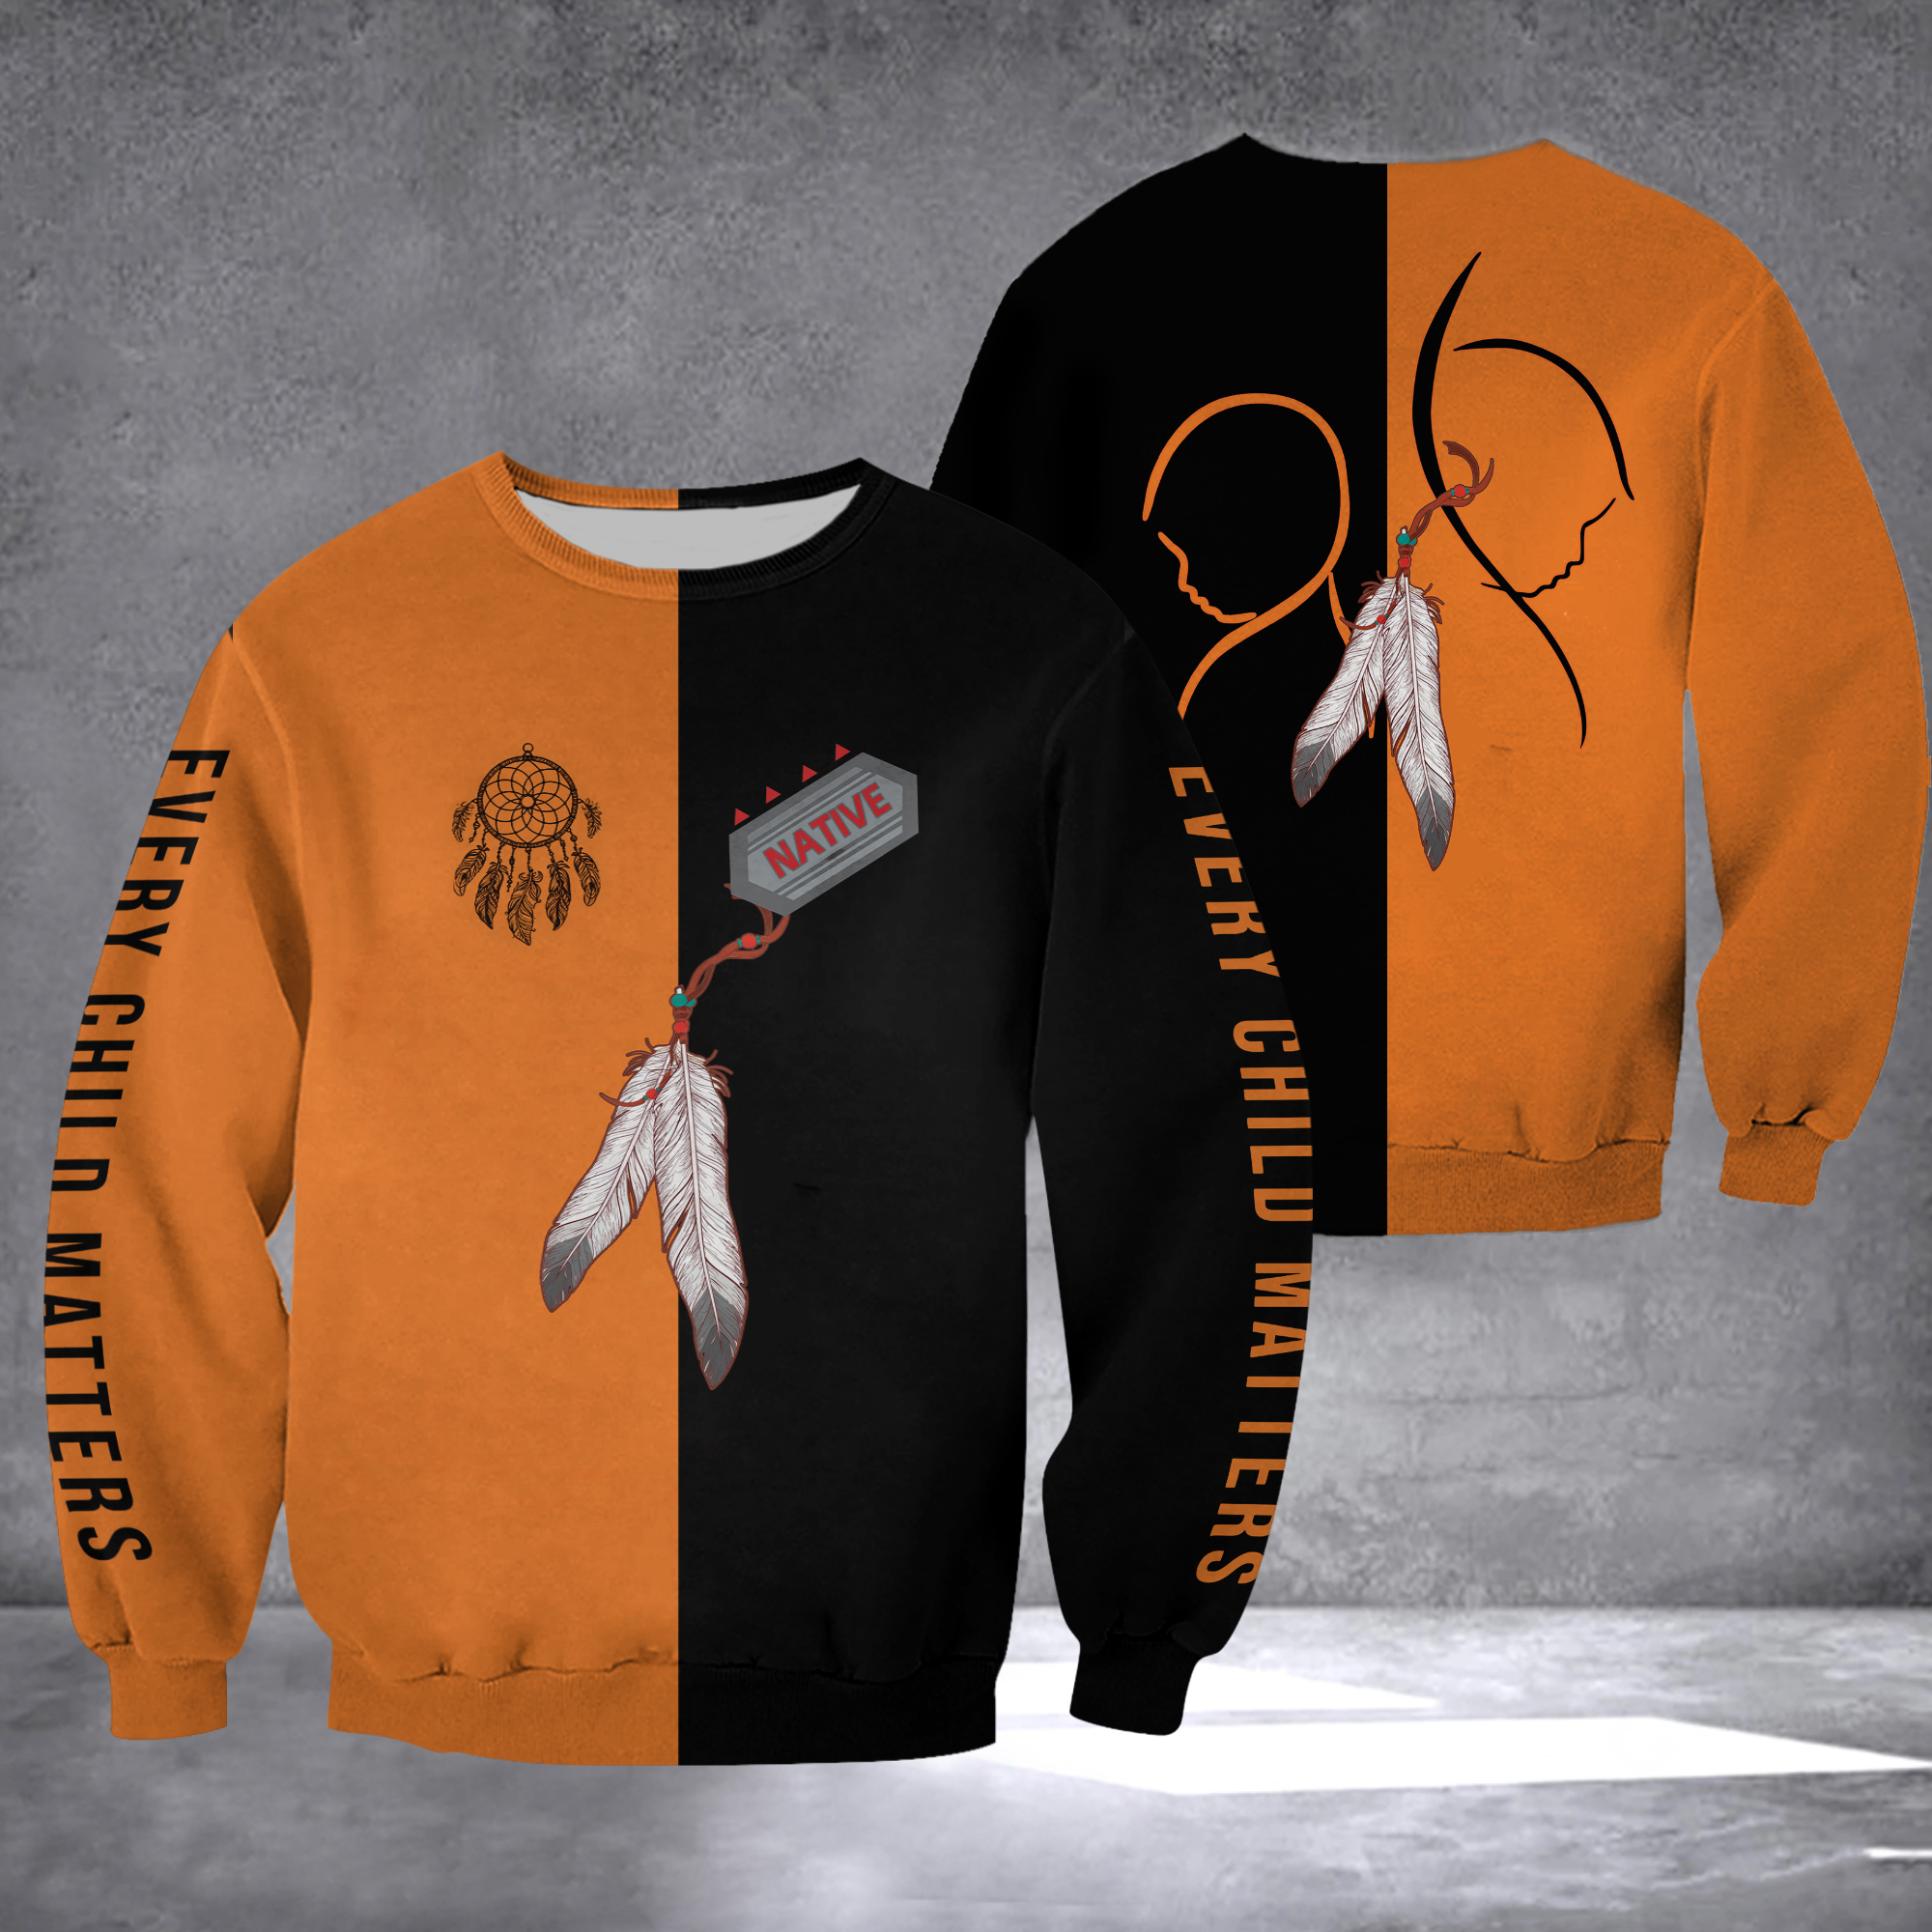 Orange Sweatshirt Day 2023 Every Child Matters Native Polo Shirt Golf Clothing For Mens